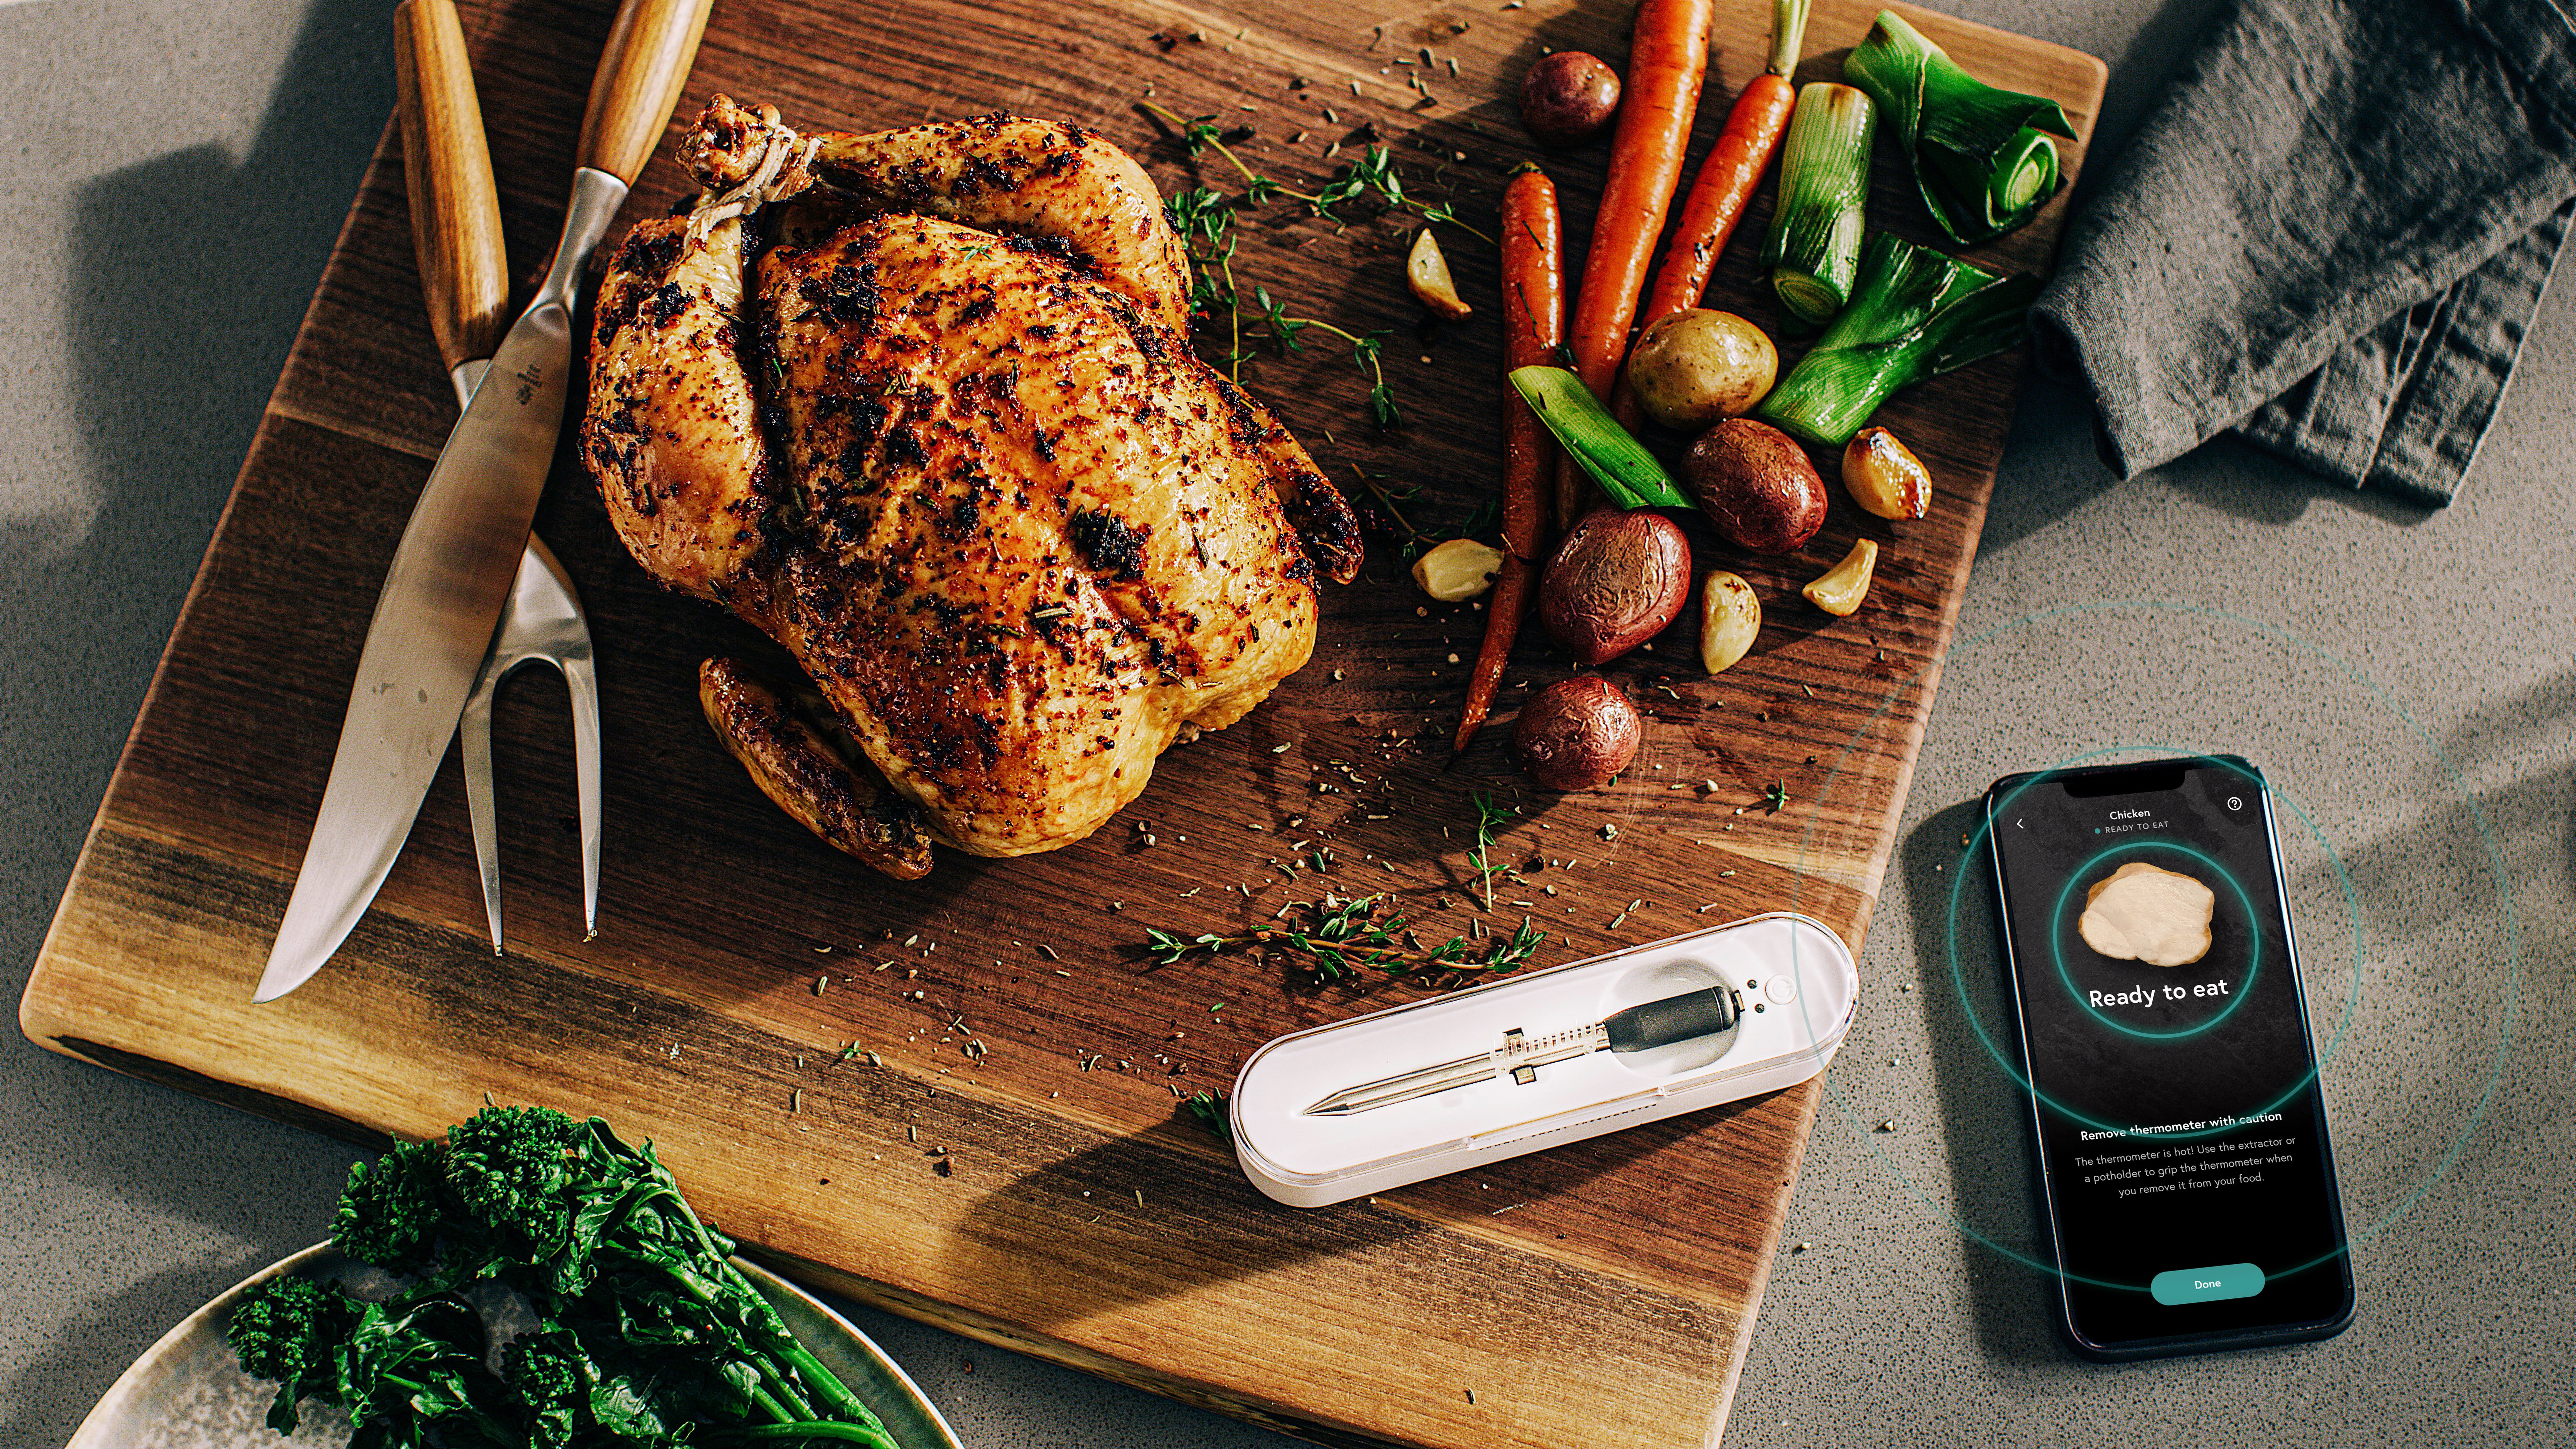  Yummly Smart Meat Thermometer with Wireless Bluetooth